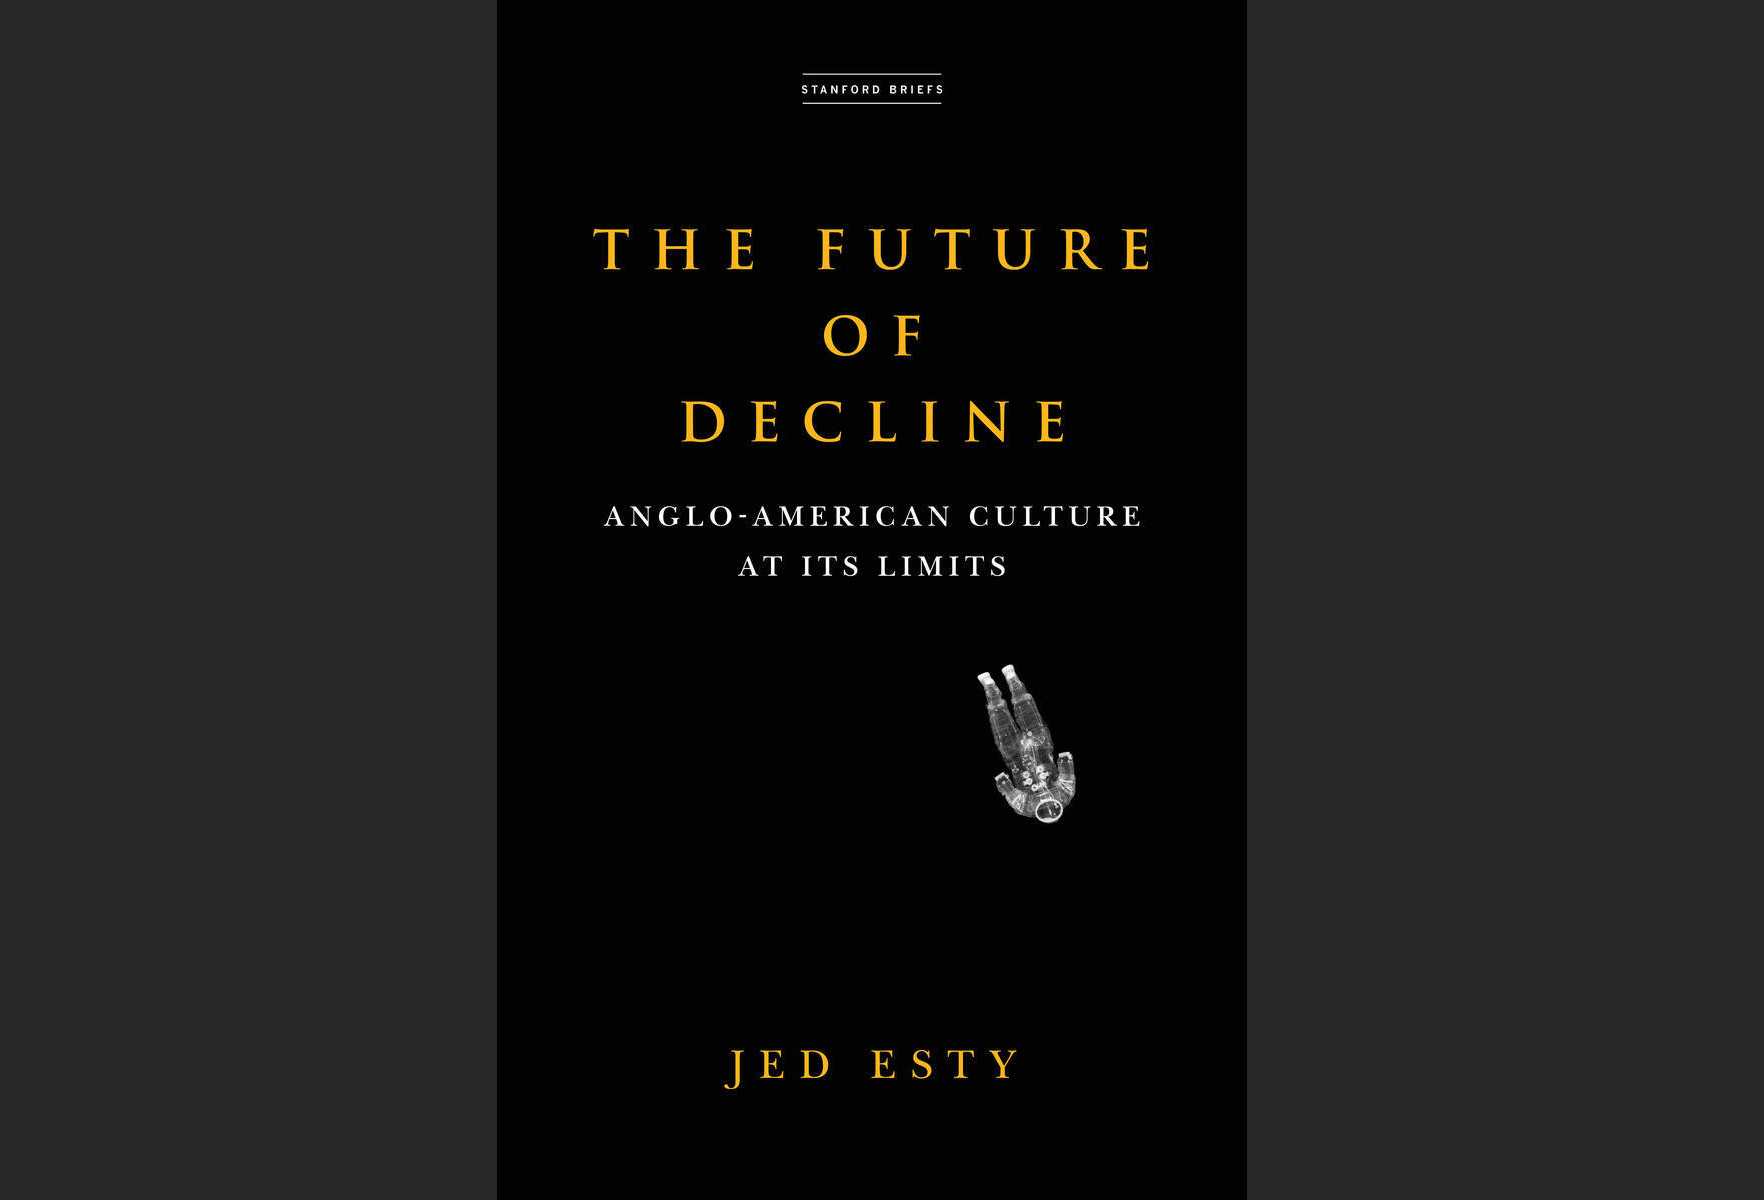 The Future of Decline Anglo-American Culture at its Limits by Jed Esty book cover